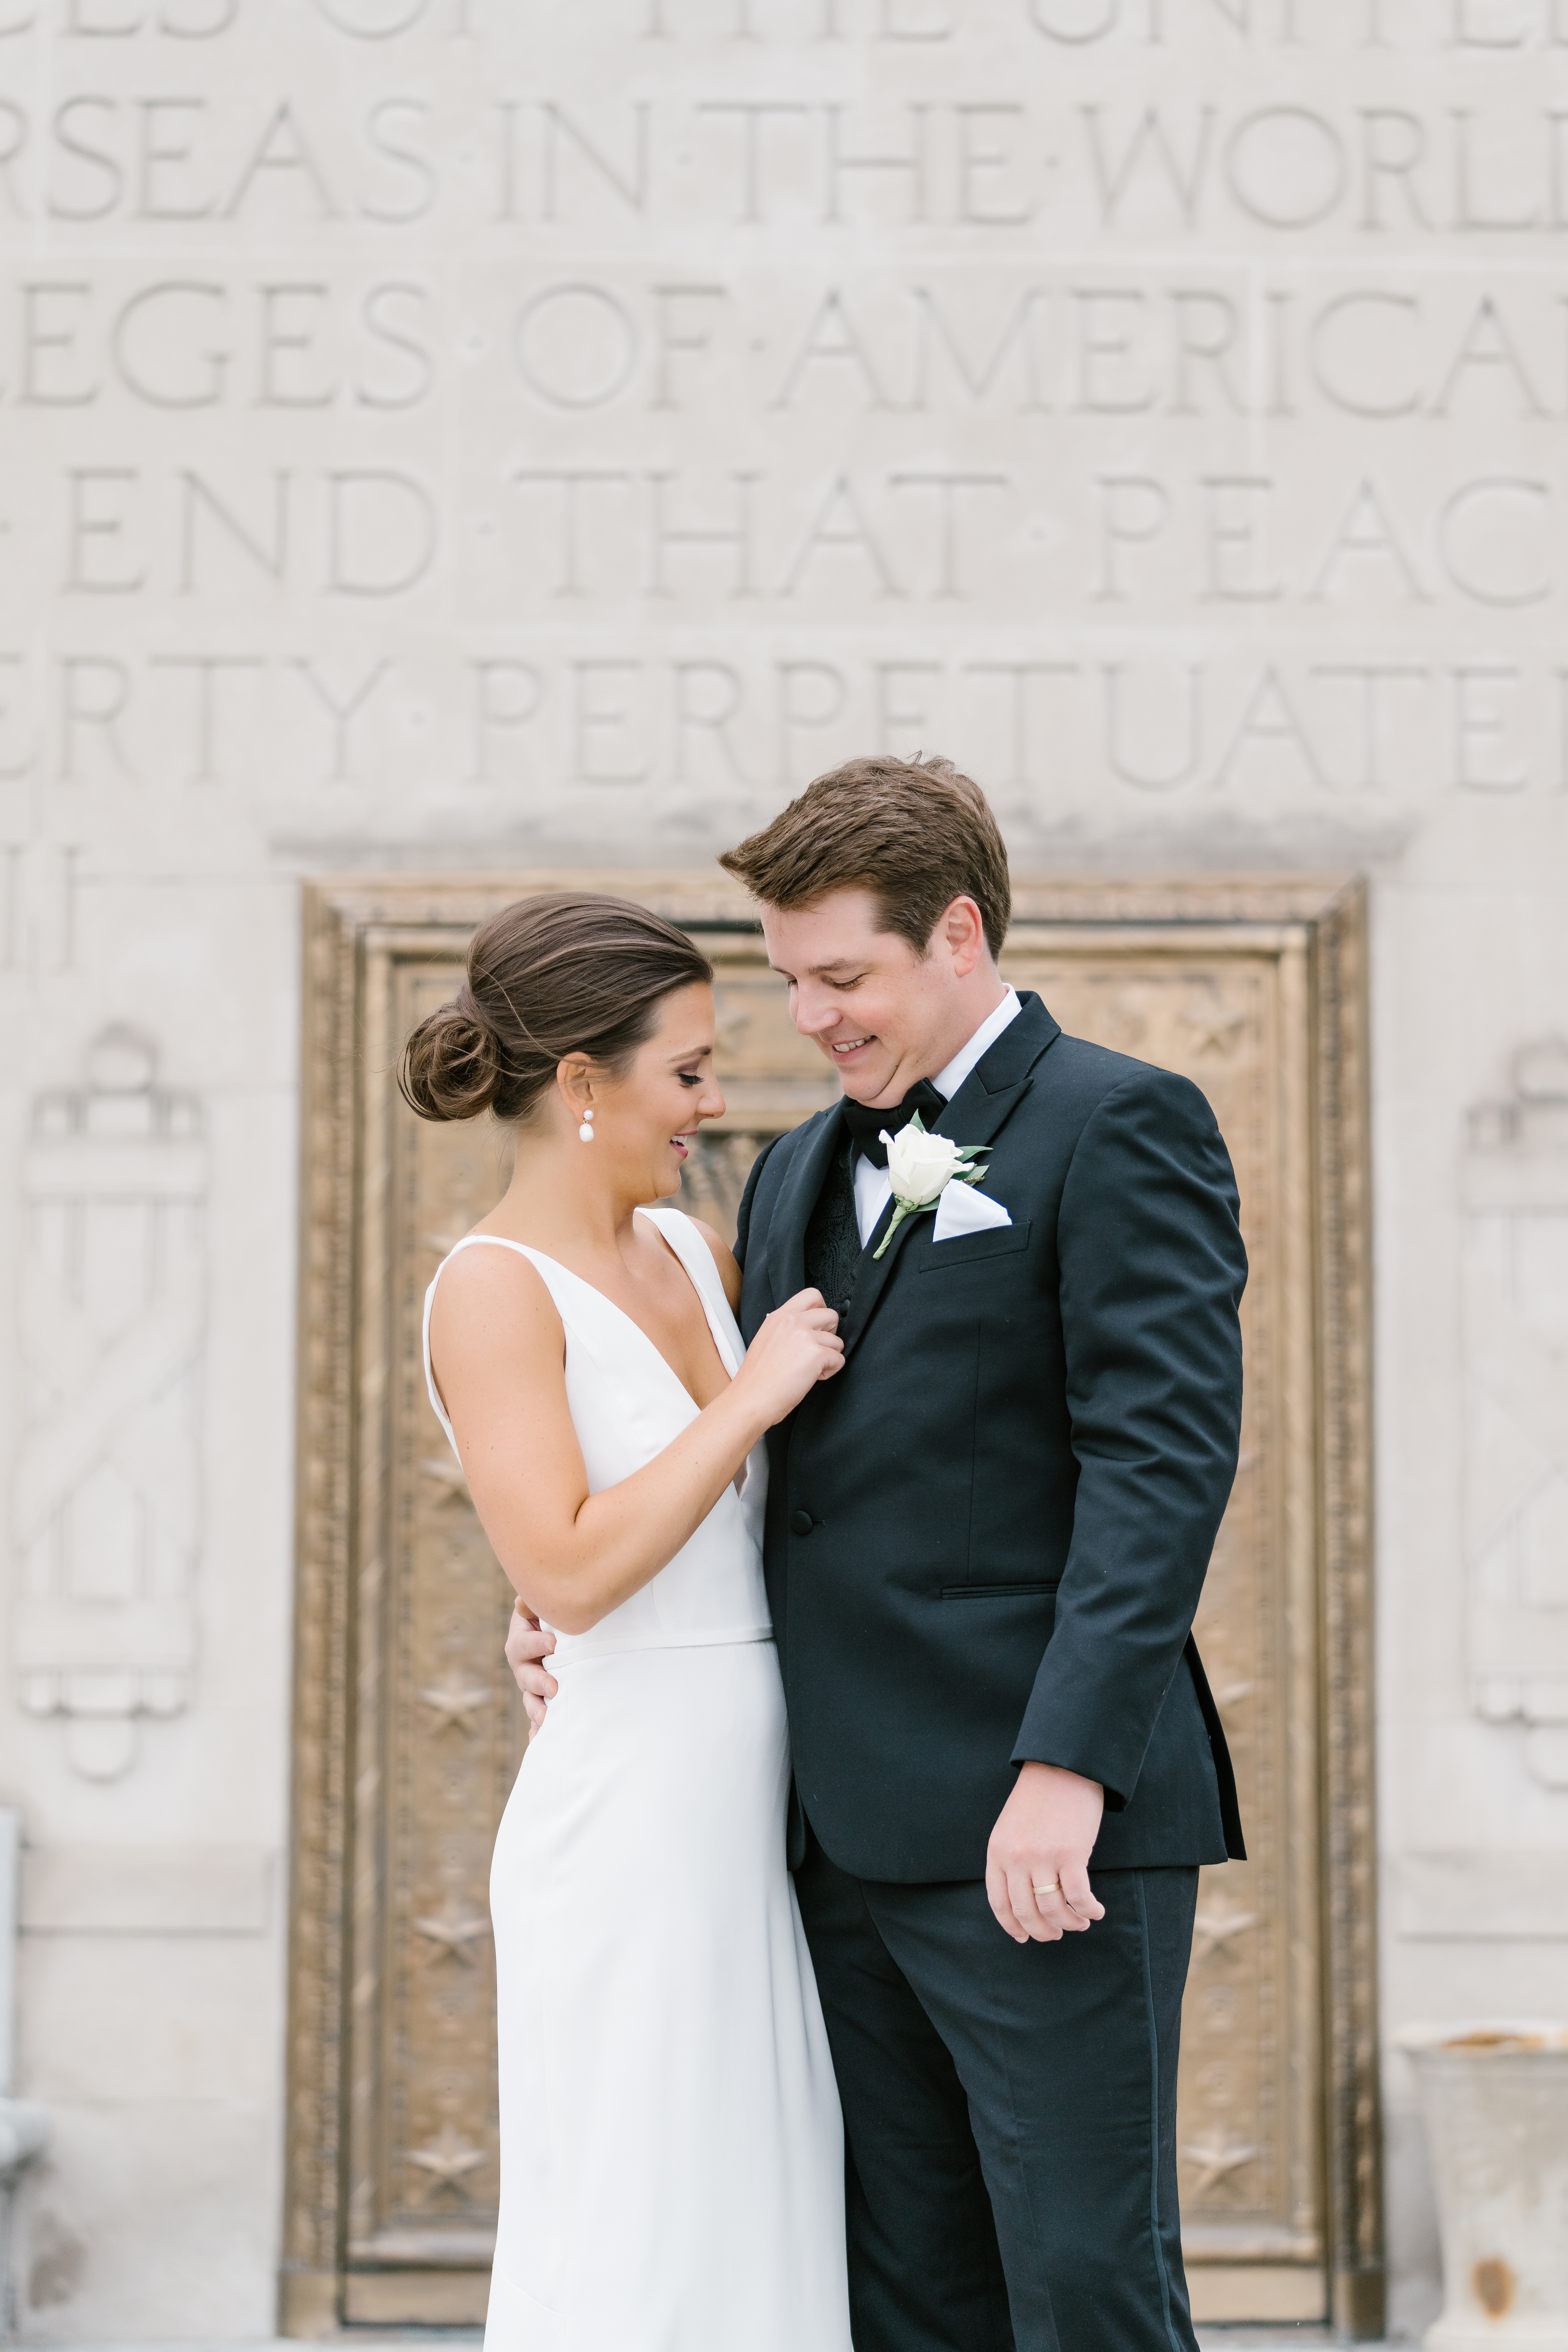 Summer Newfields Wedding in Indianapolis, Indiana with Stacy Able Photography and Jessica Dum Wedding Coordination